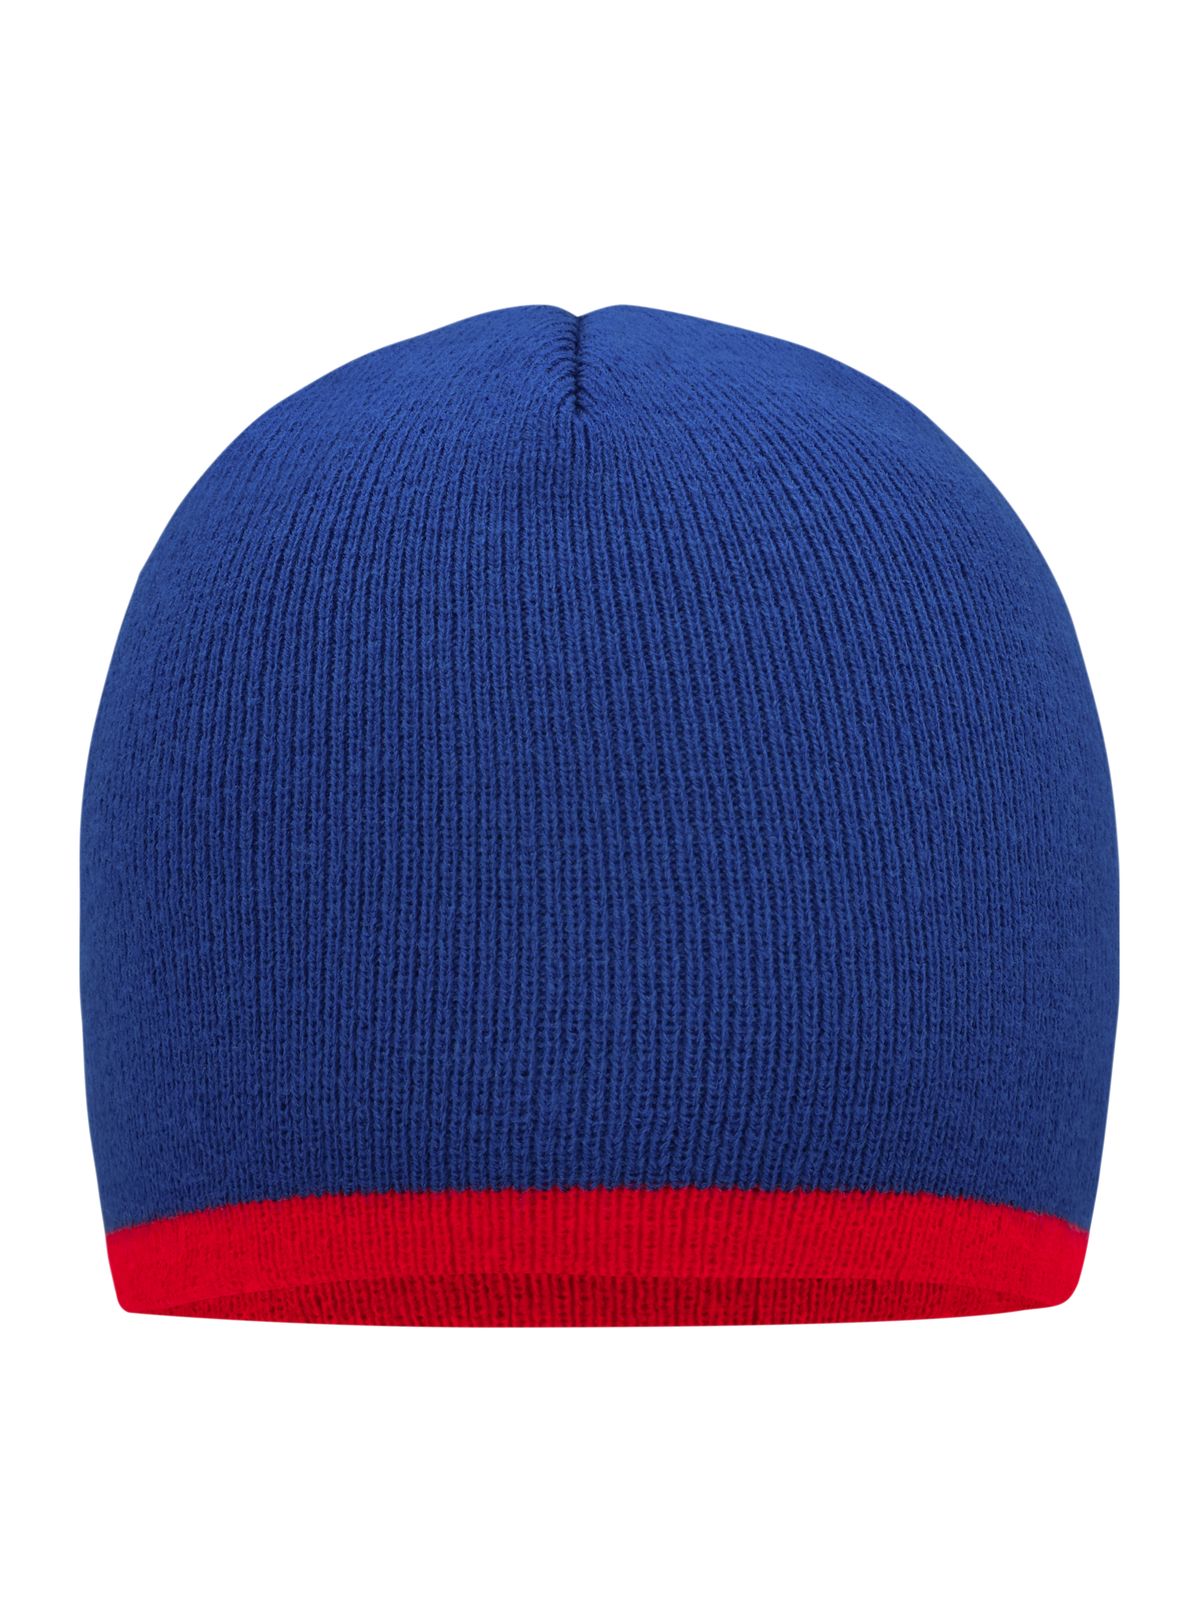 beanie-with-contrasting-border-royal-red.webp